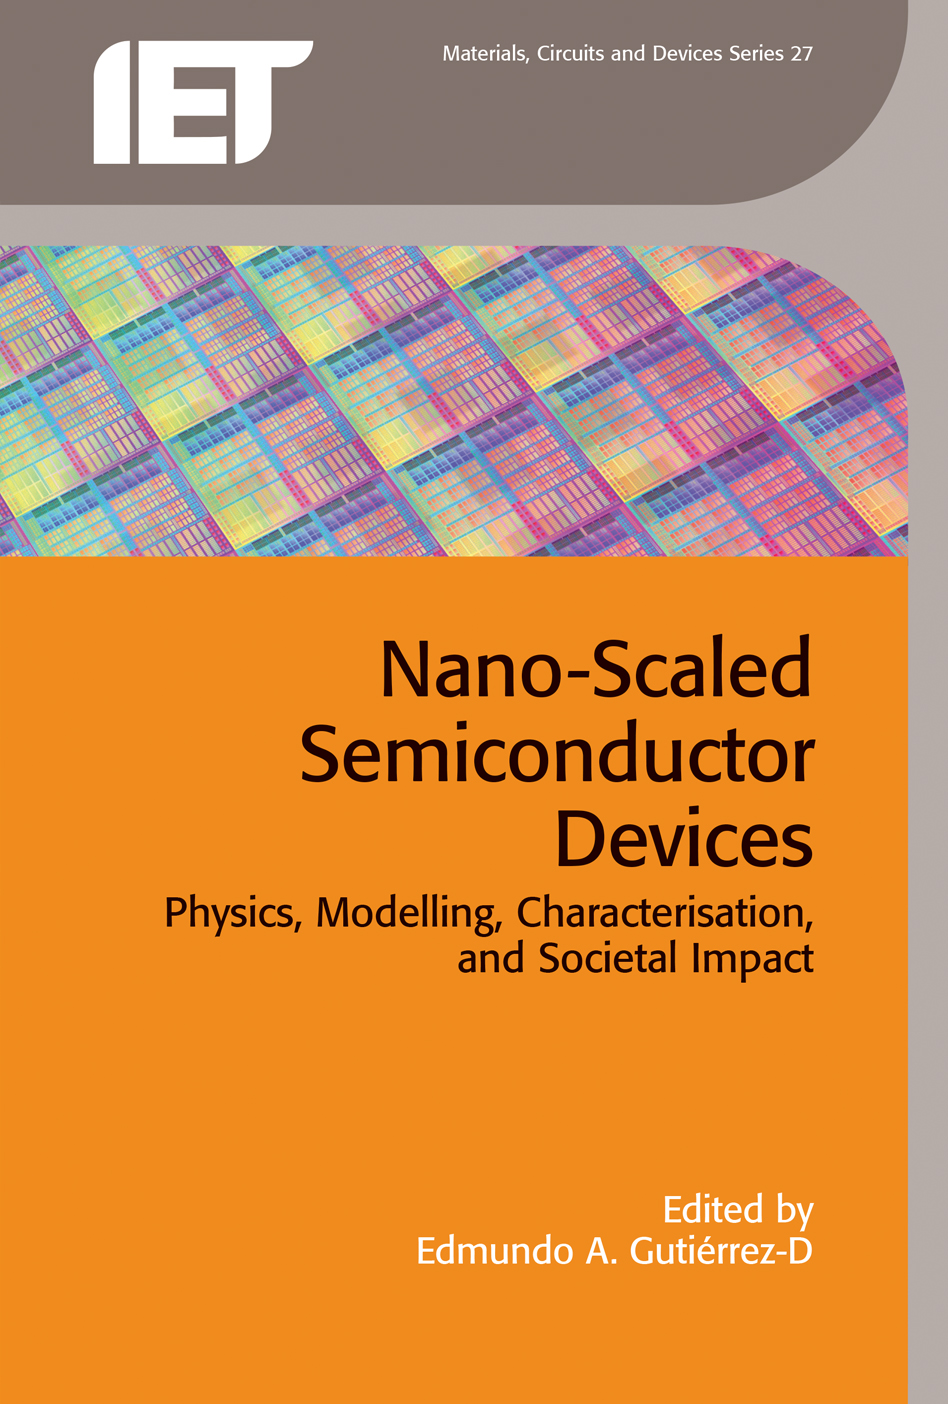 Nano-Scaled Semiconductor Devices, Physics, modelling, characterisation, and societal impact